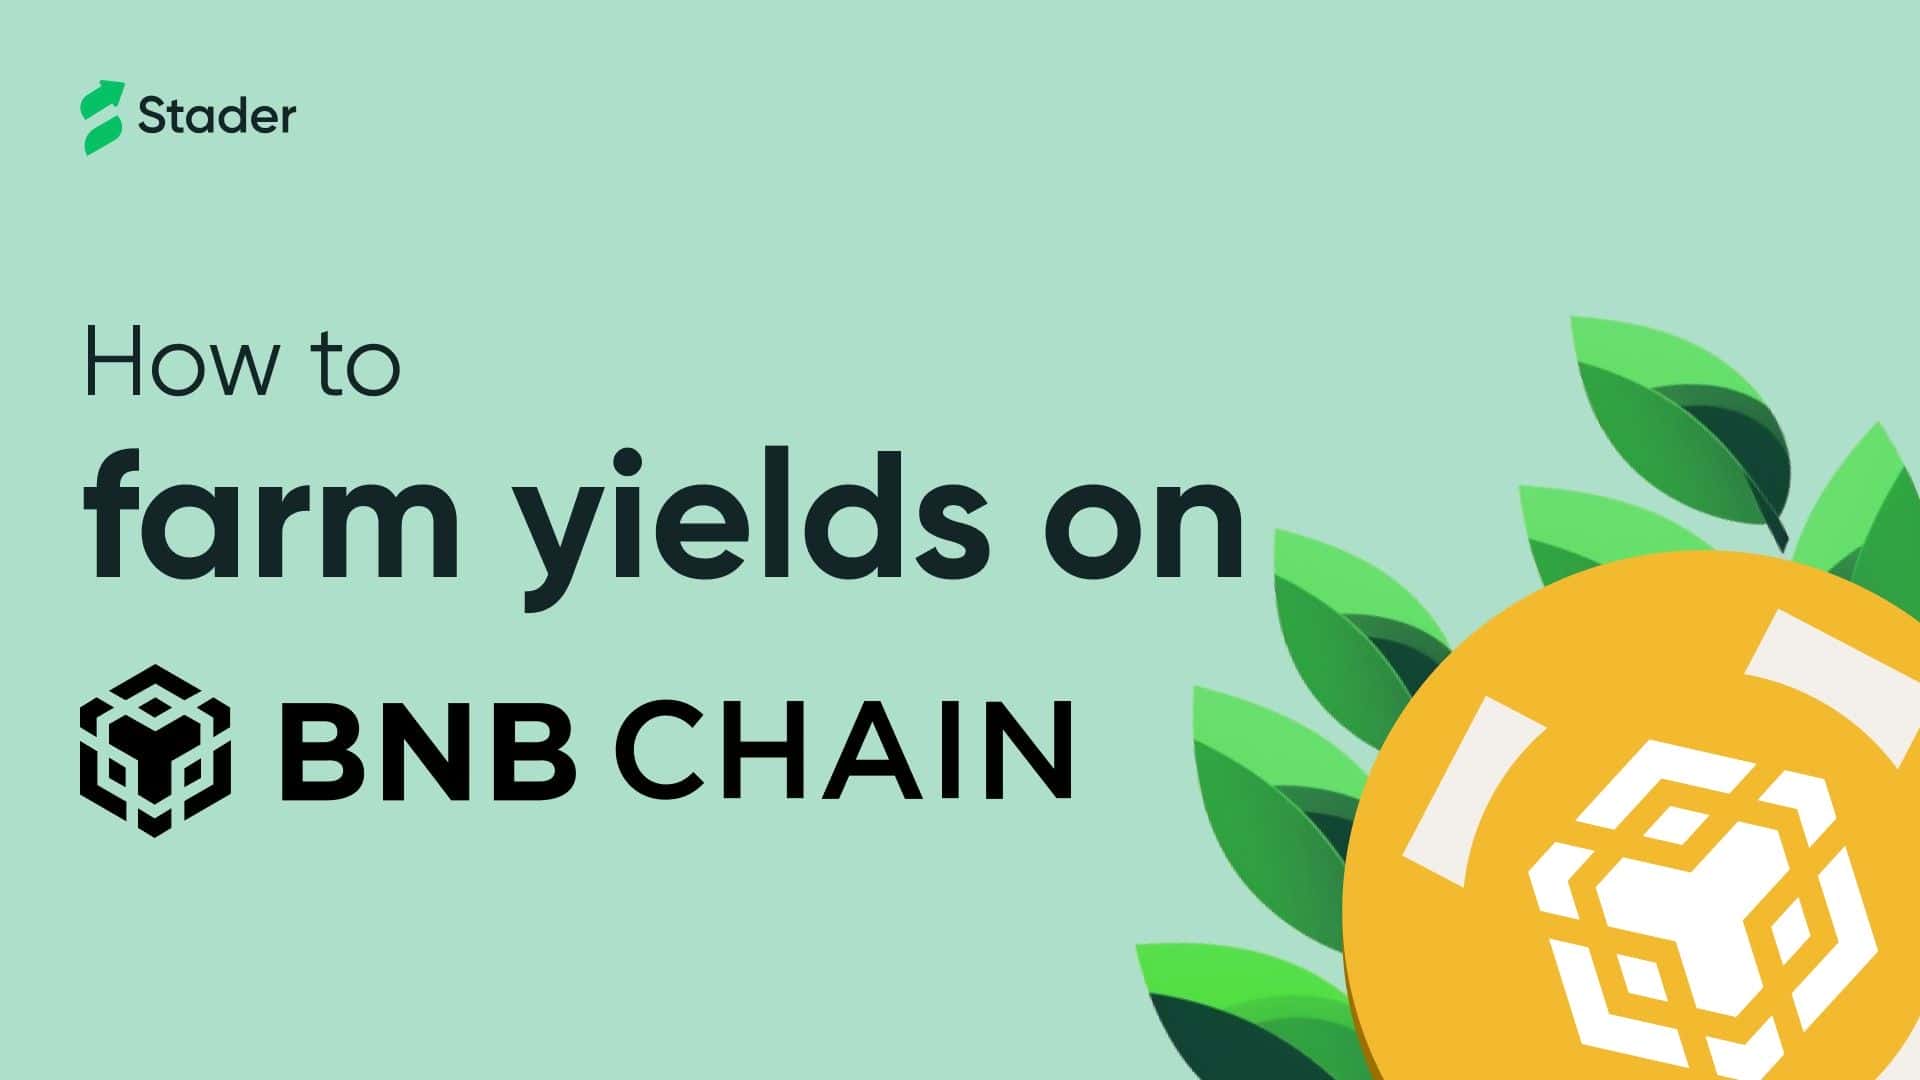 How to Farm yields on the BNB Chain